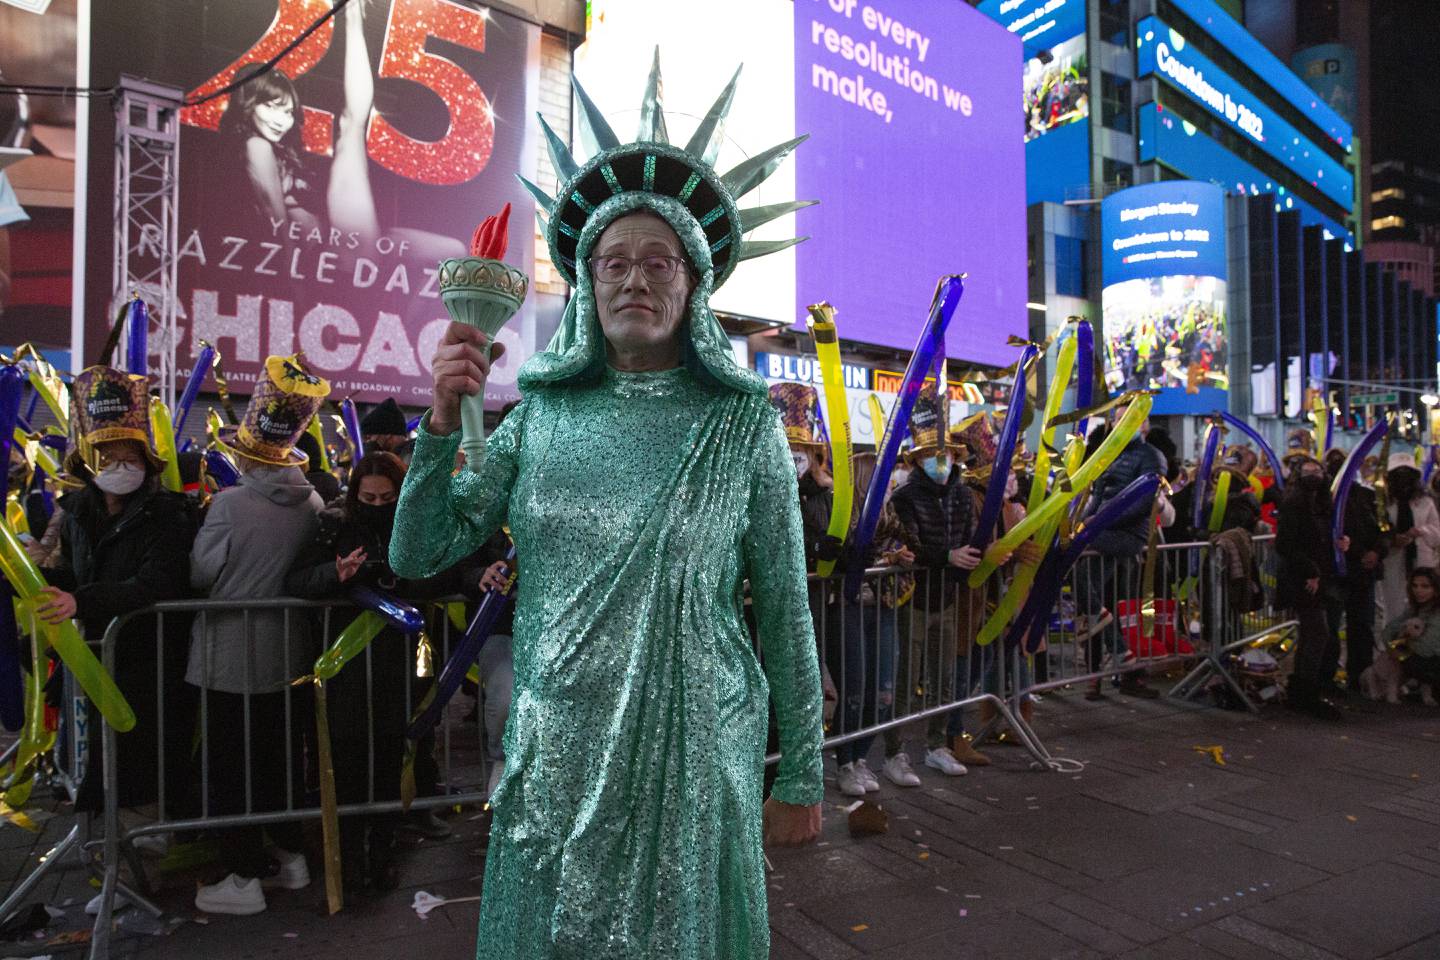 CNN broadcaster Richard Quest dressed up as the Statue of Liberty to celebrate the New Year. Photo: EPA